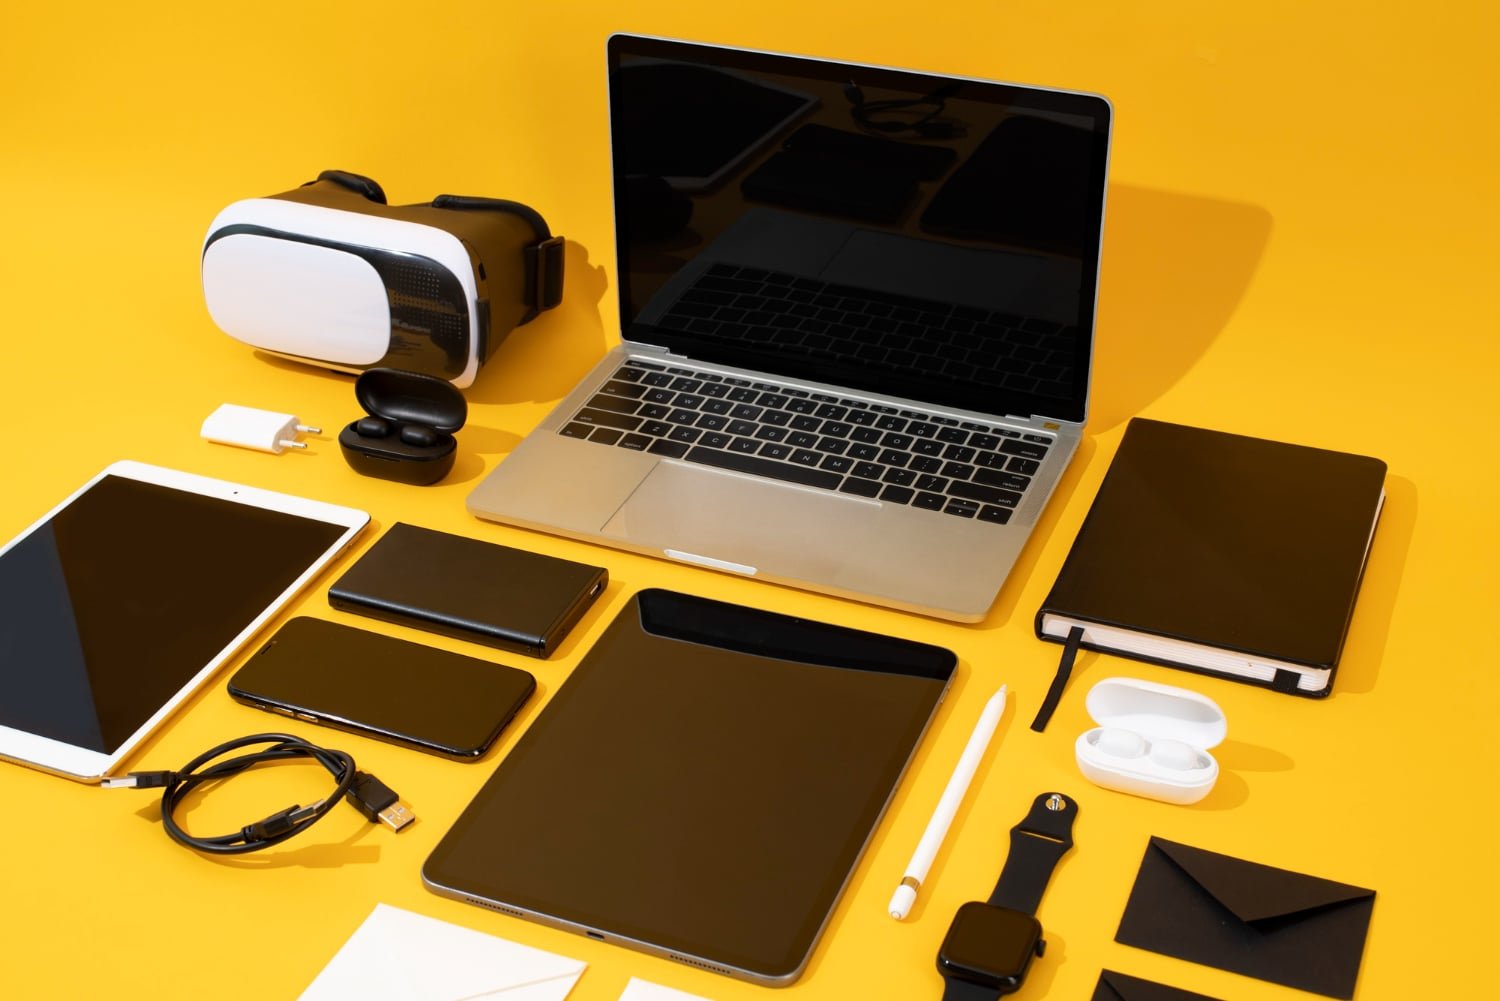 Upgrade Your Tech with Satechi’s Innovative Accessories